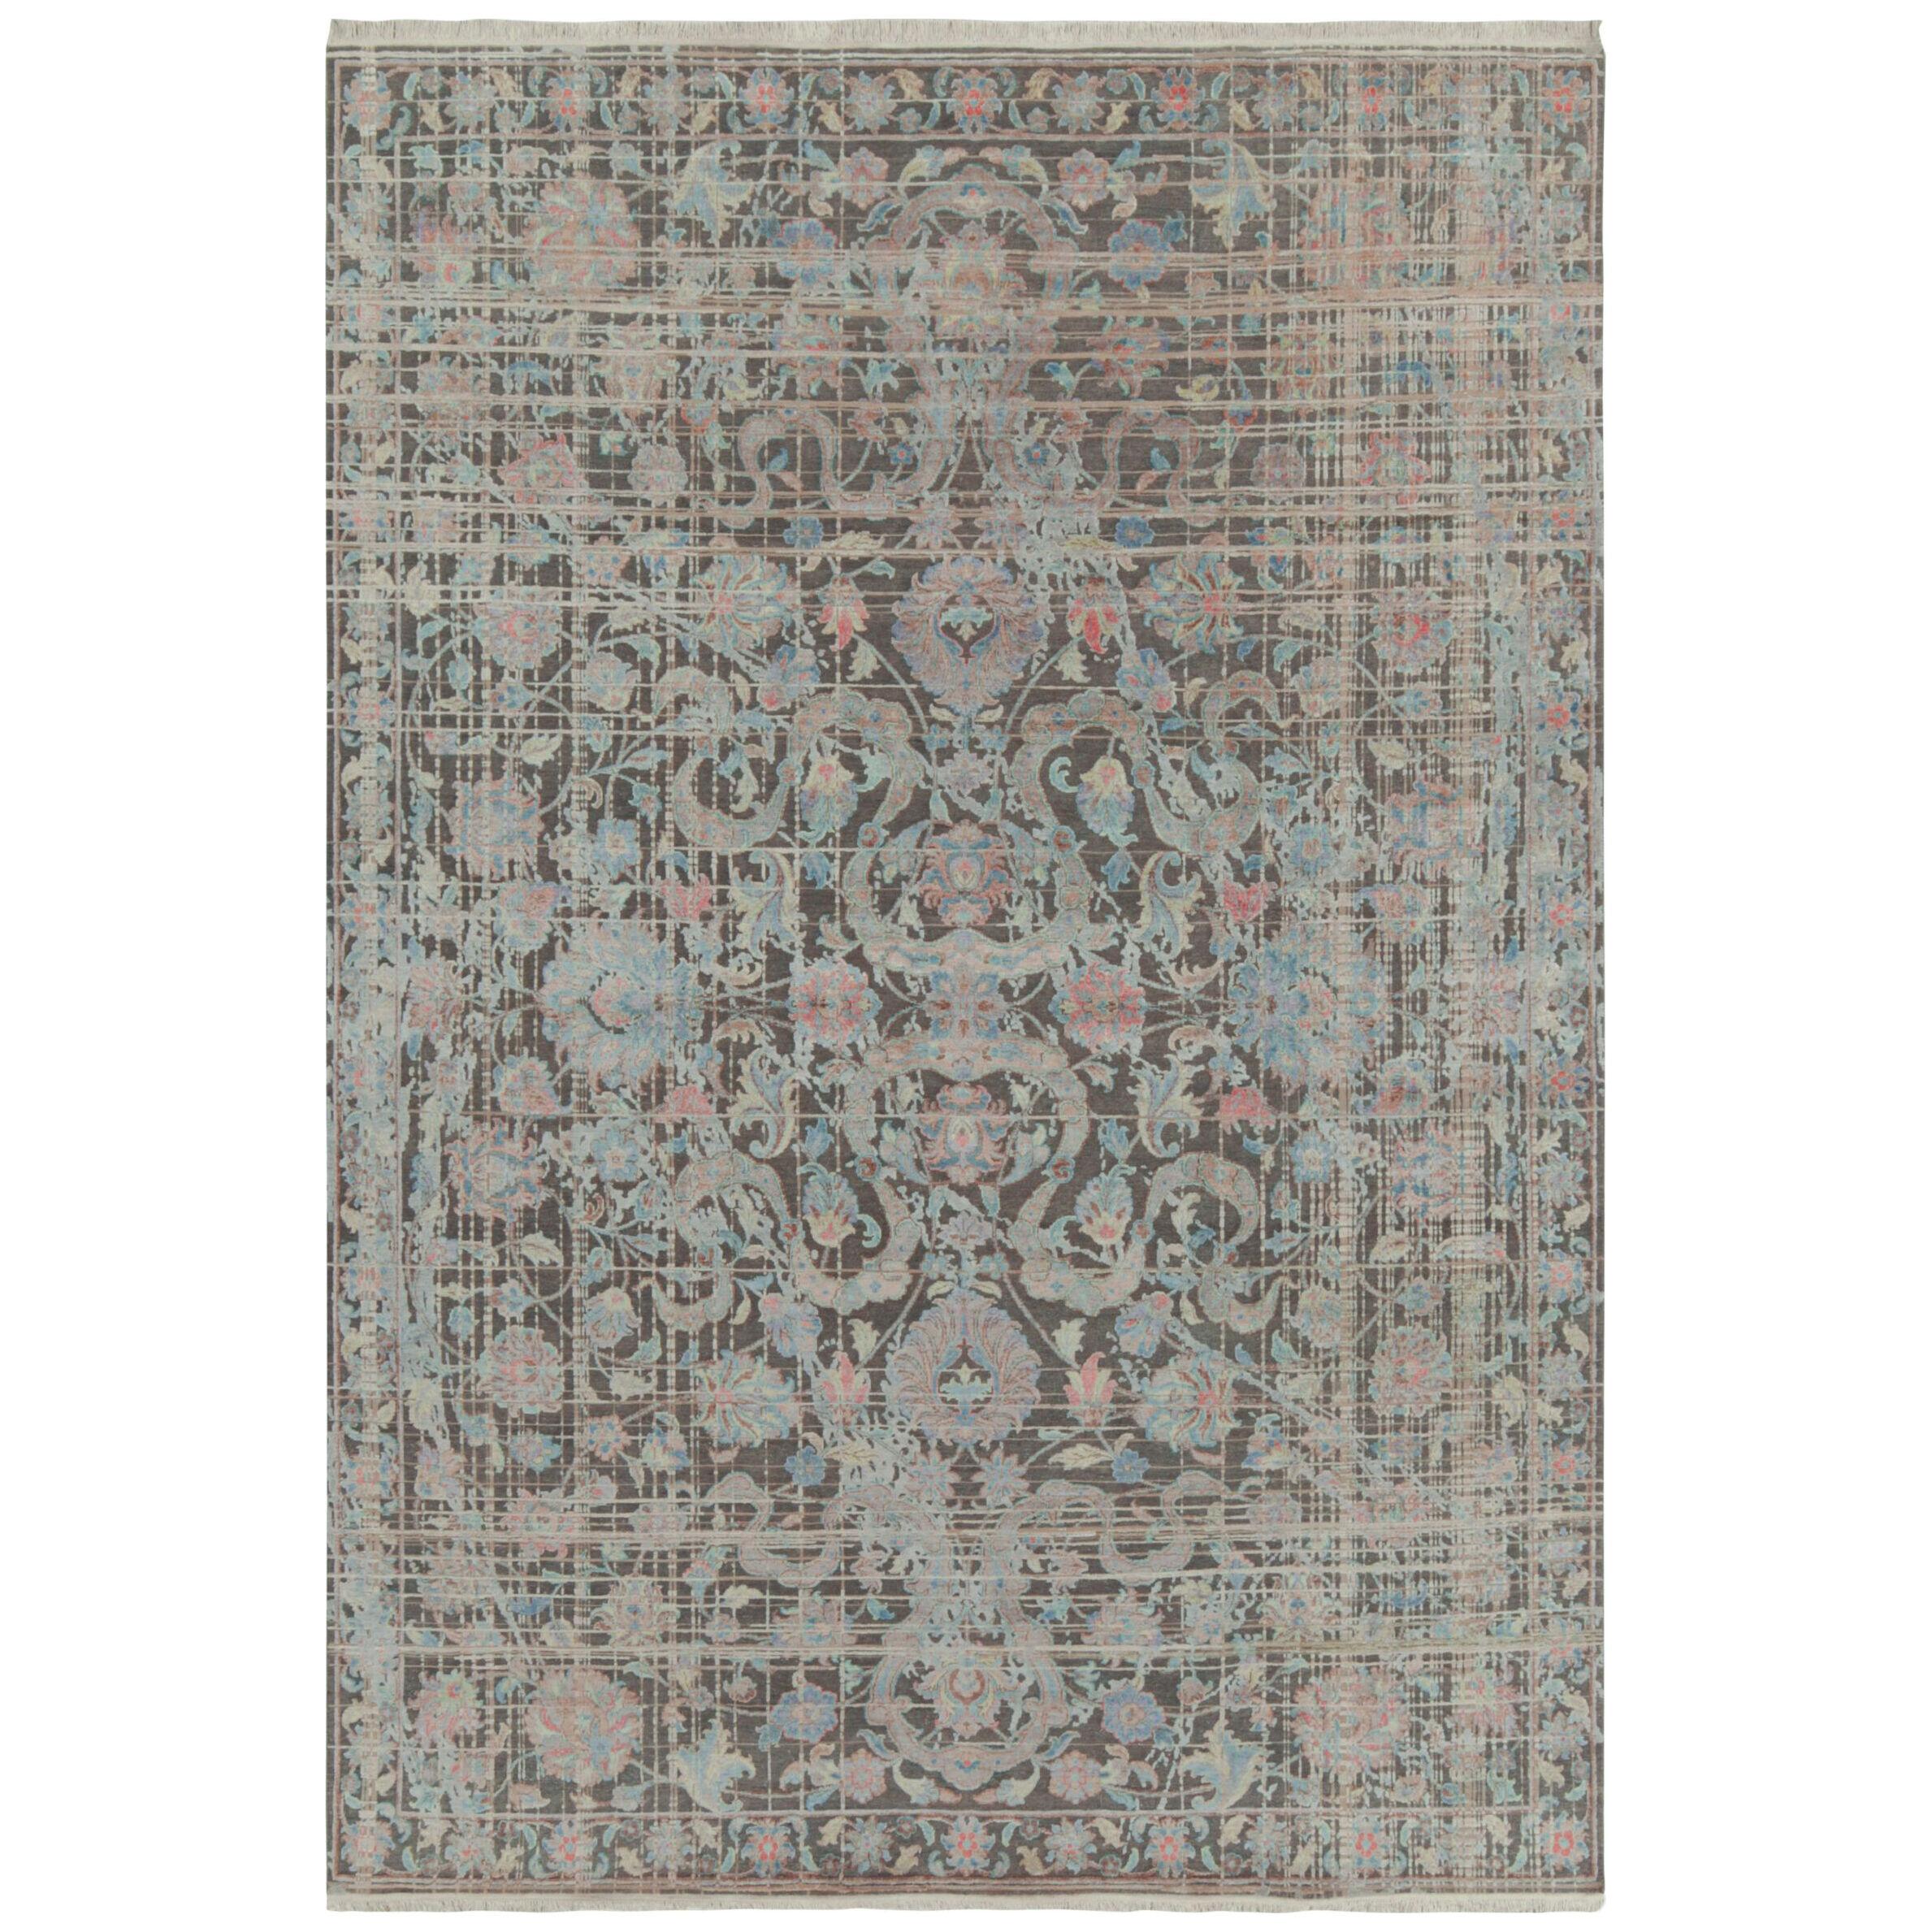 Rug & Kilim’s Persian Style Modern Rug in Gray With Polychrome Floral Patterns